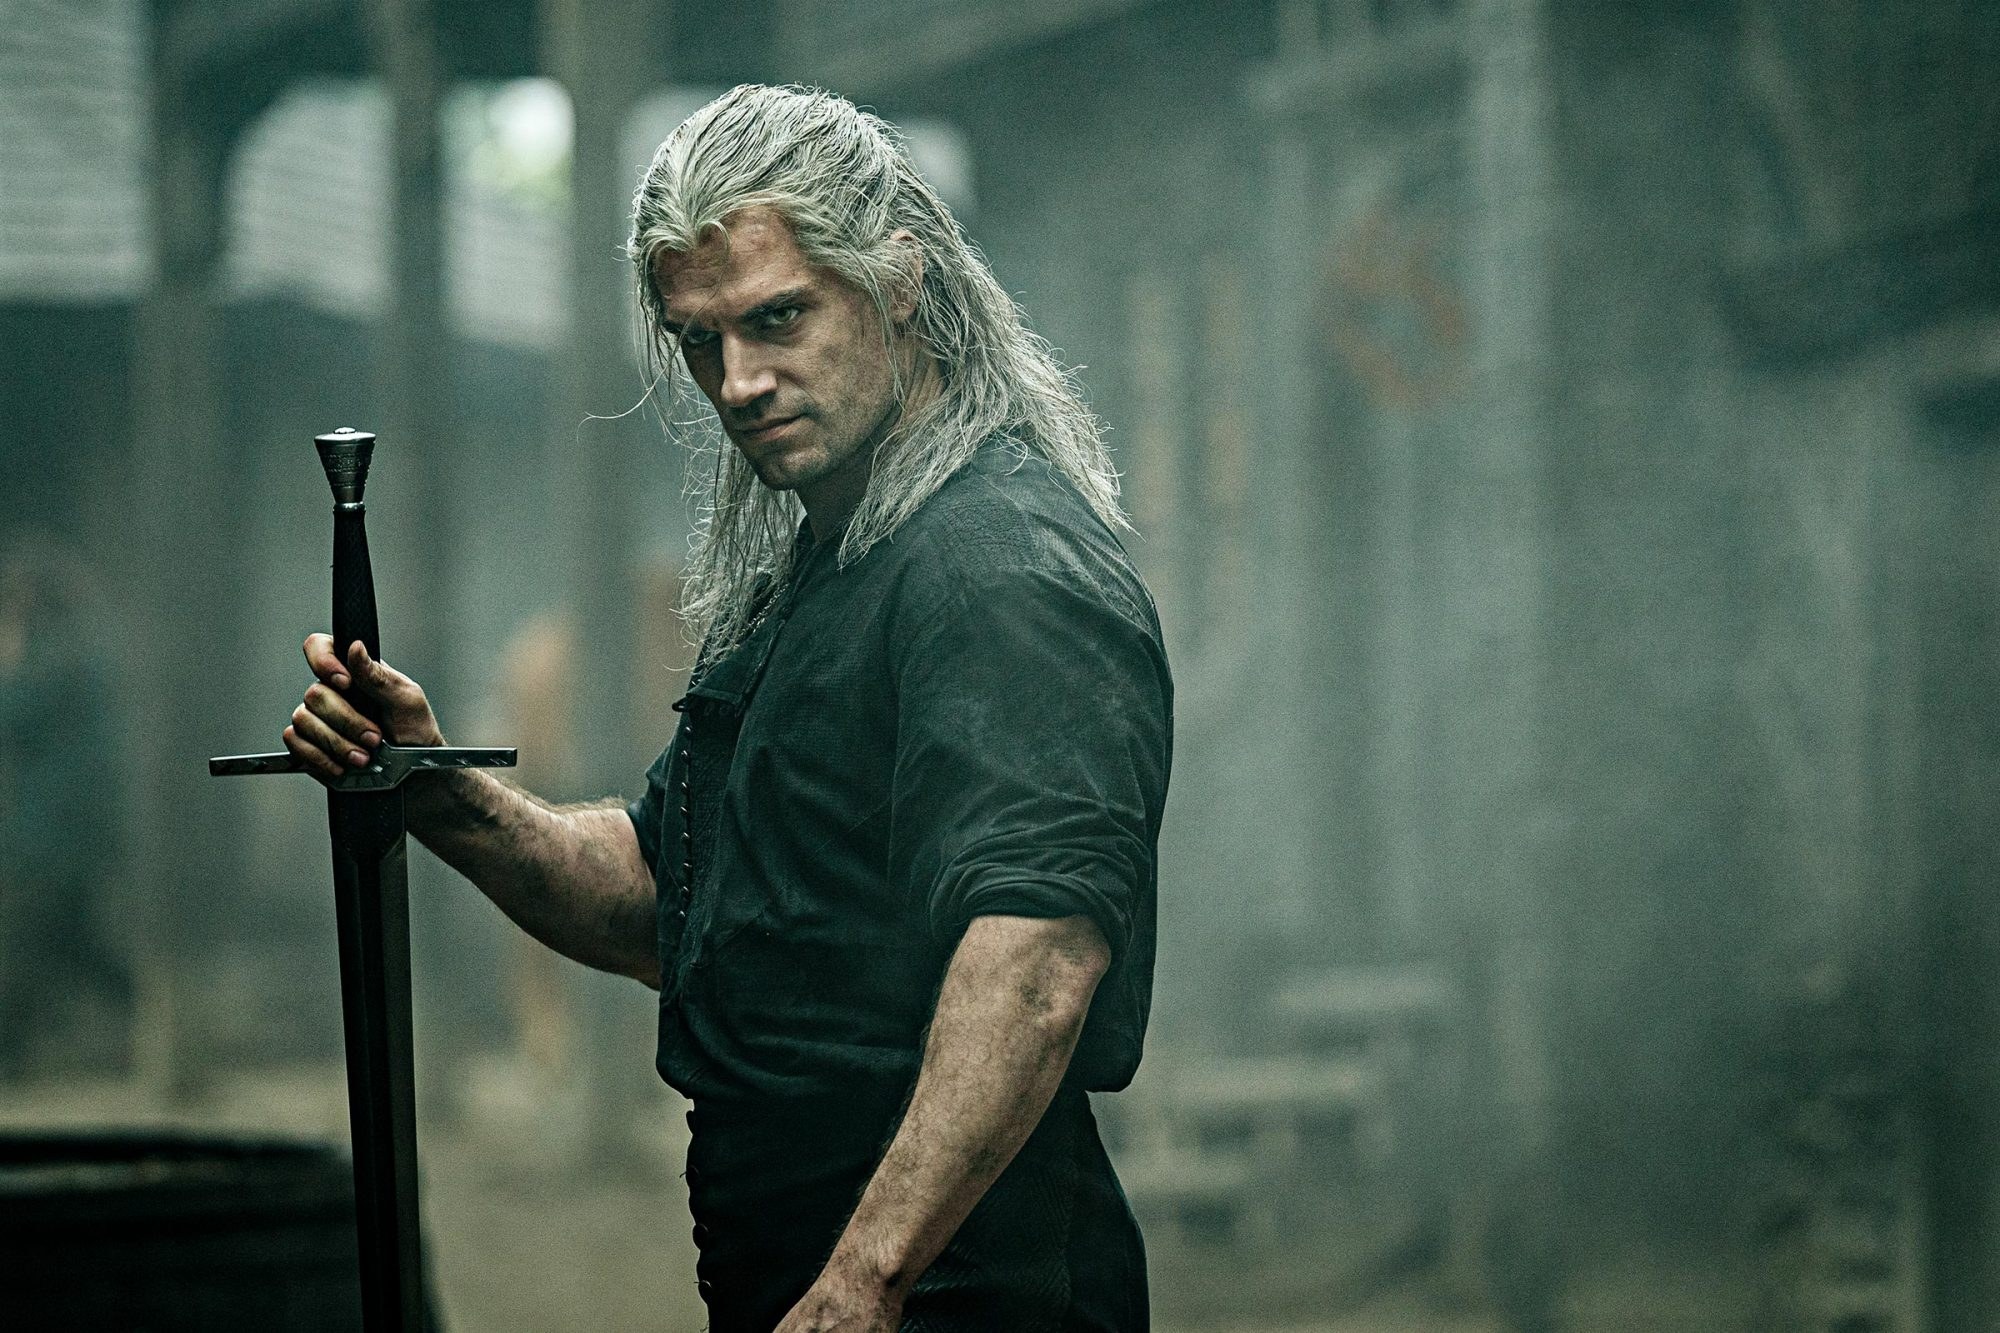 The Witcher: Blood Origin is Netflix's next live-action monster-slaying series